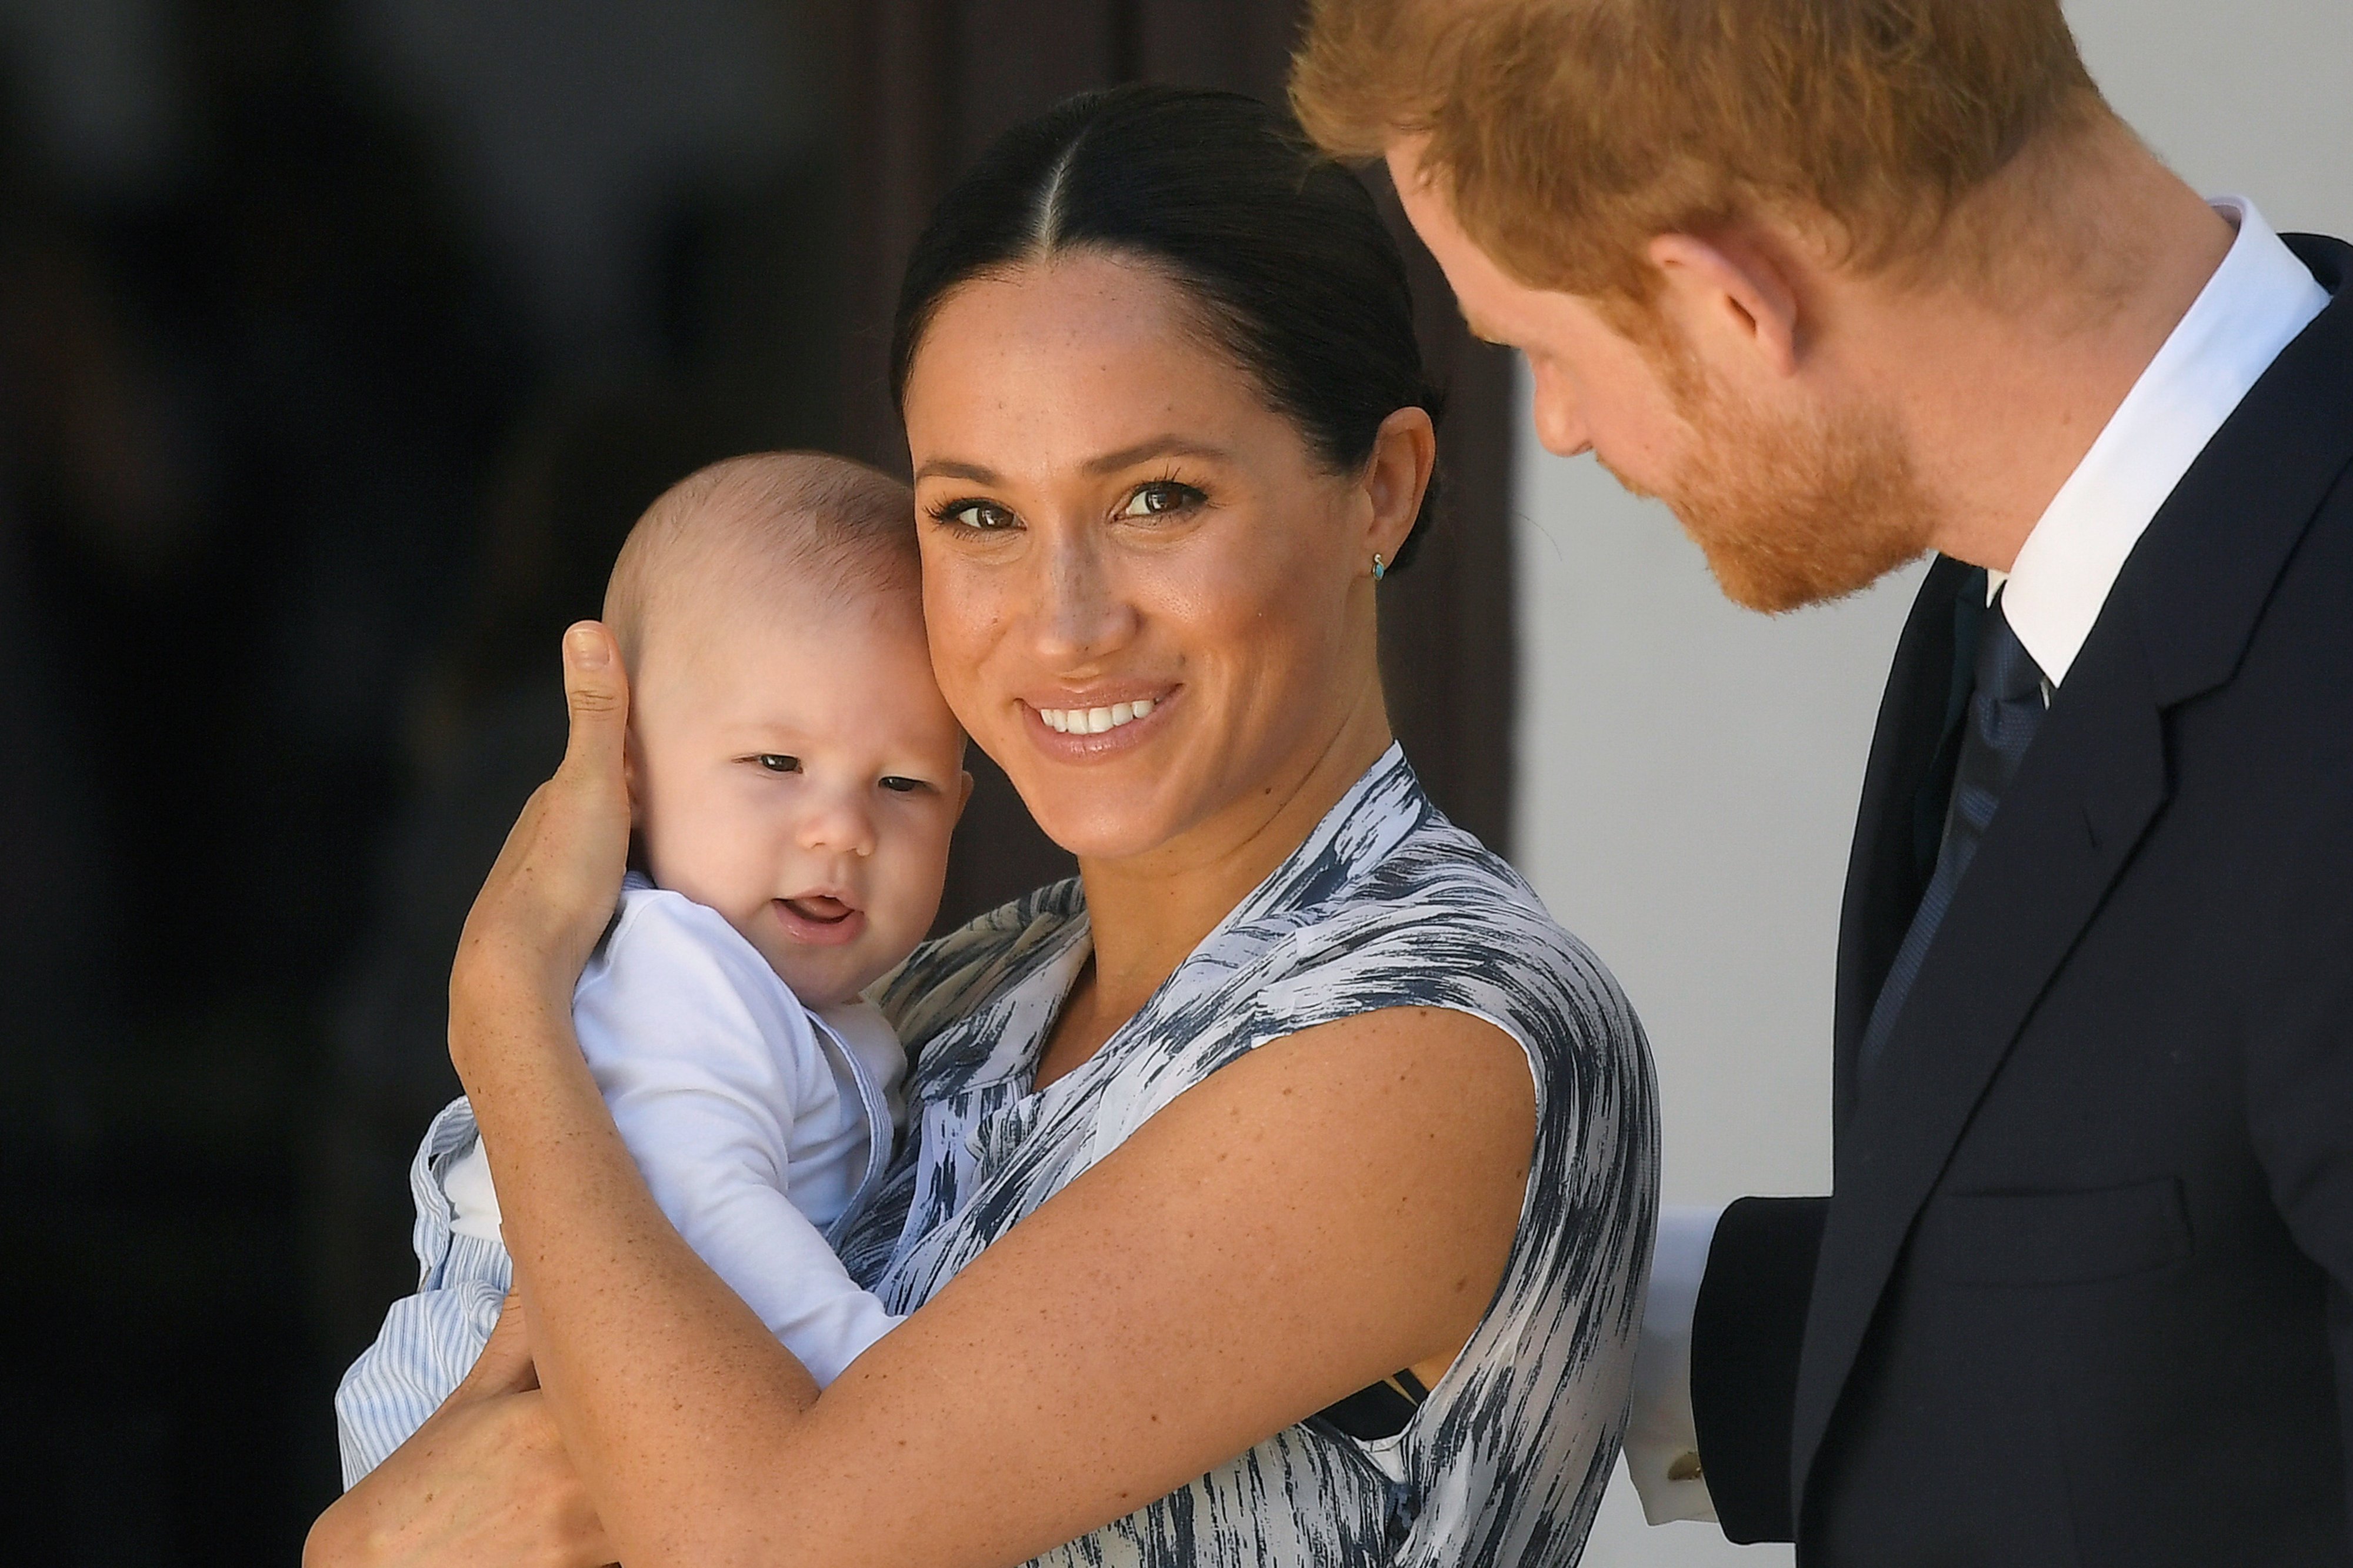 Prince Harry, Meghan Markle, and their son Archie during their royal tour of South Africa on September 25, 2019, in Cape Town, South Africa. | Source: Getty Images.